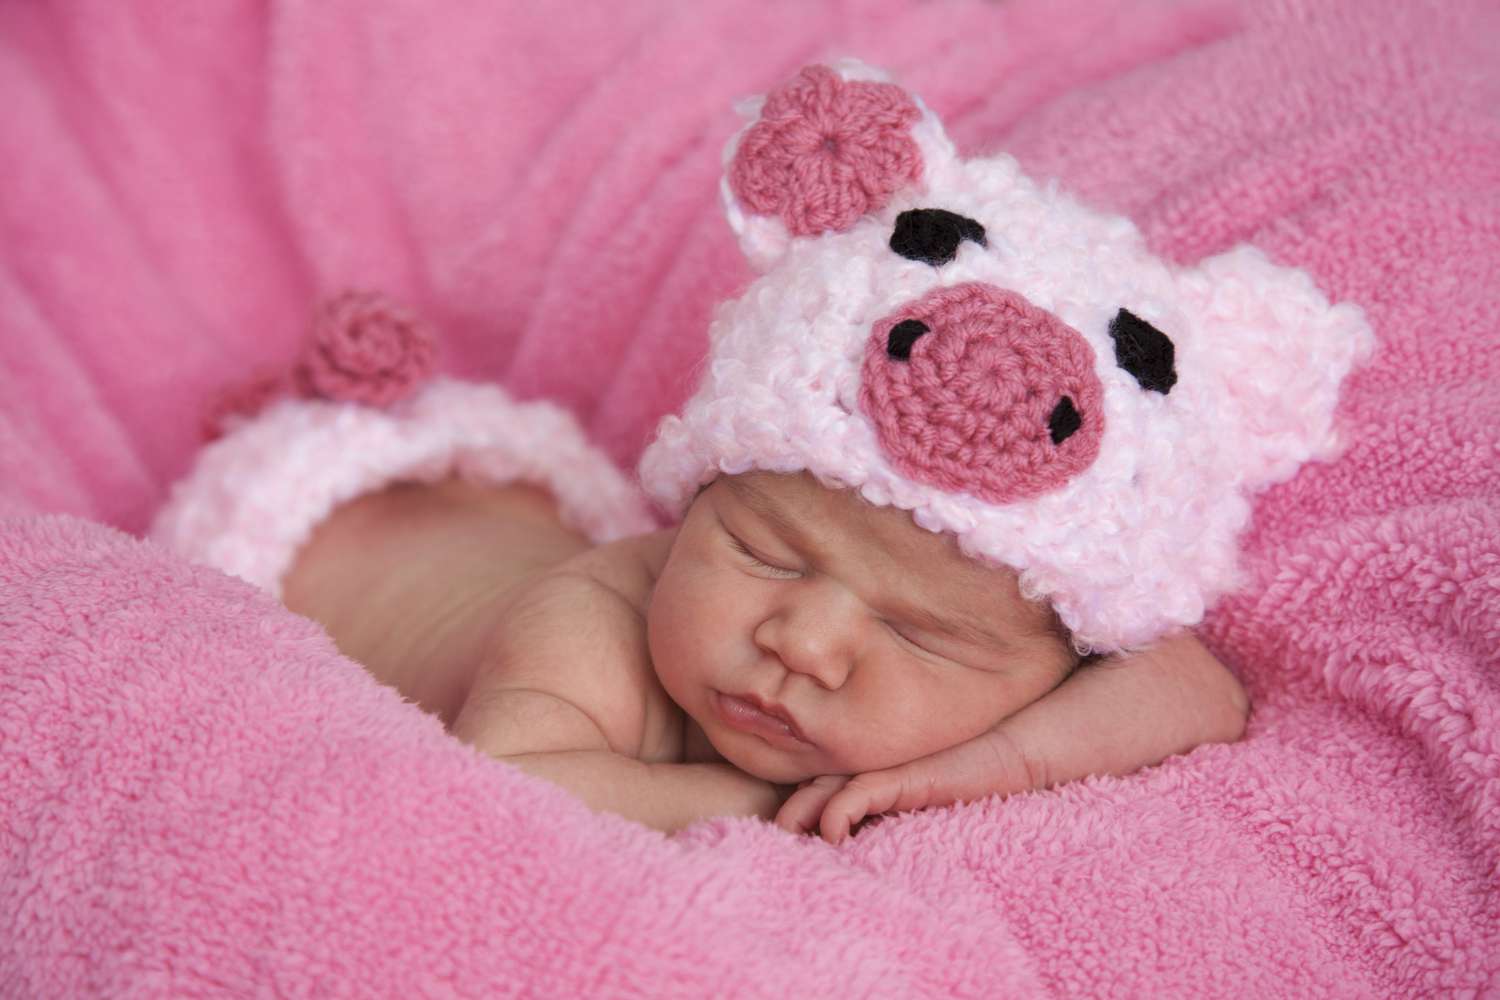 Newborn baby girl dressed in pink piggy outfit